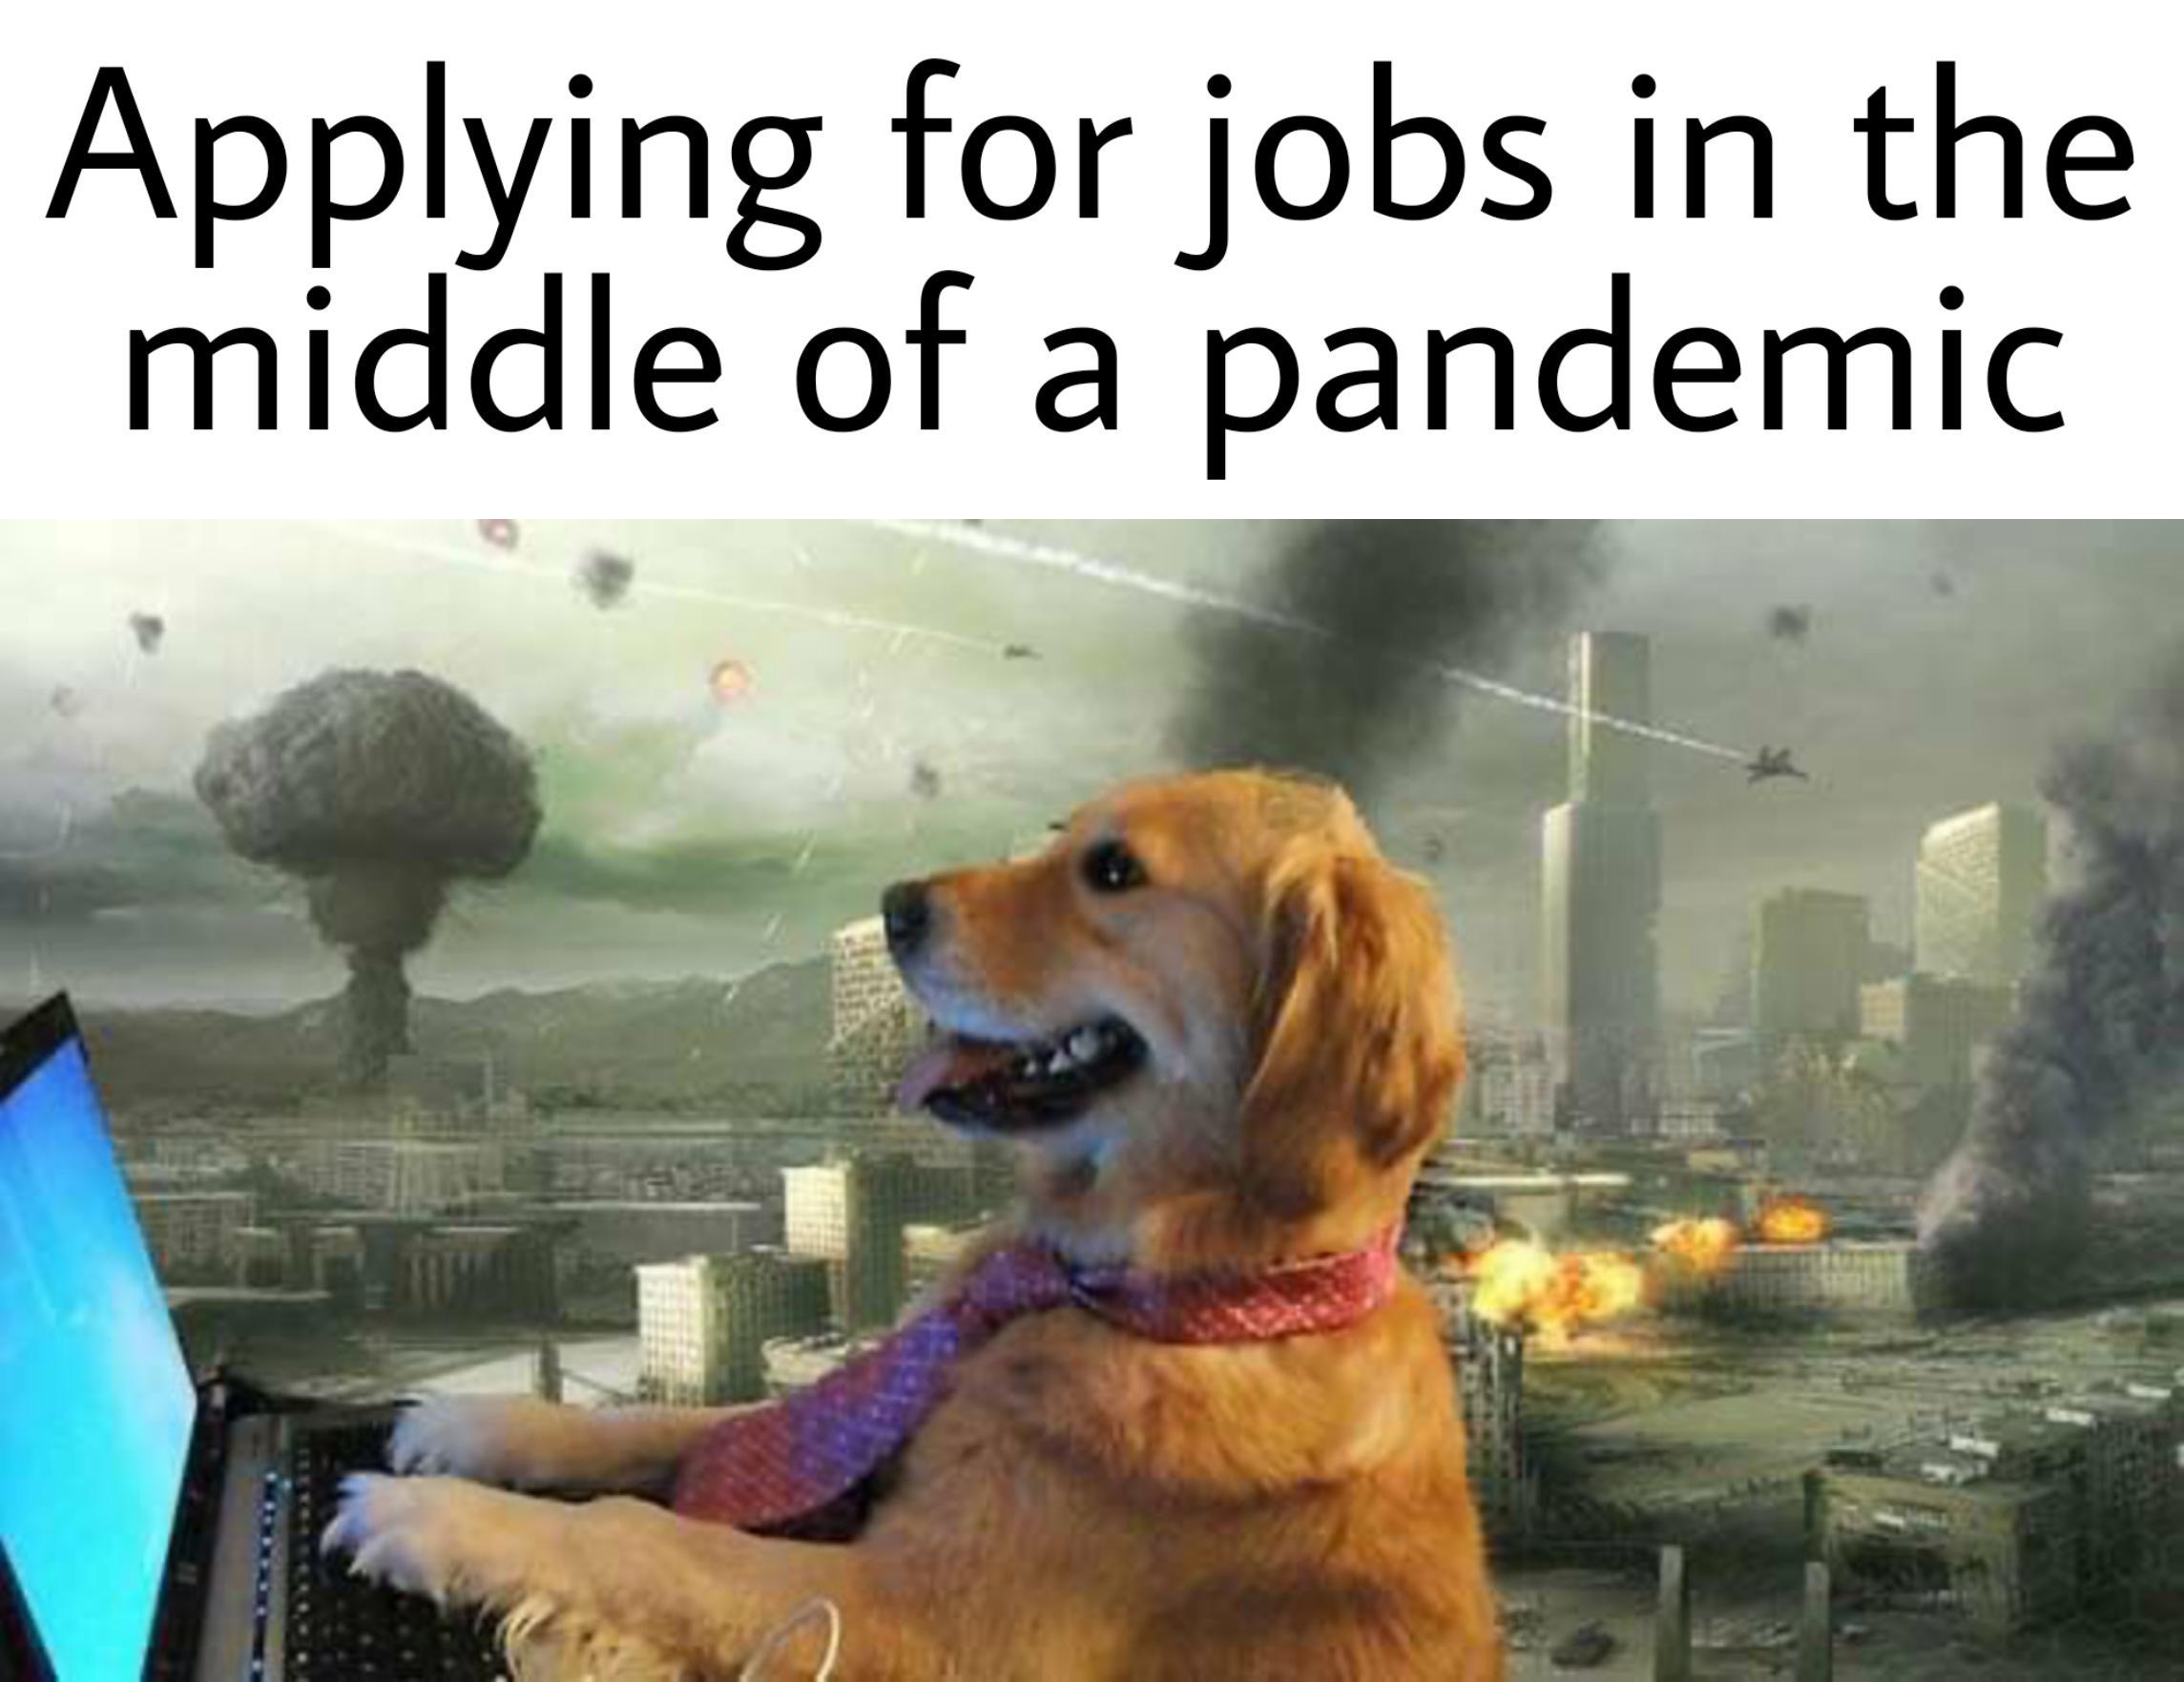 third world war apocalypse - Applying for jobs in the middle of a pandemic